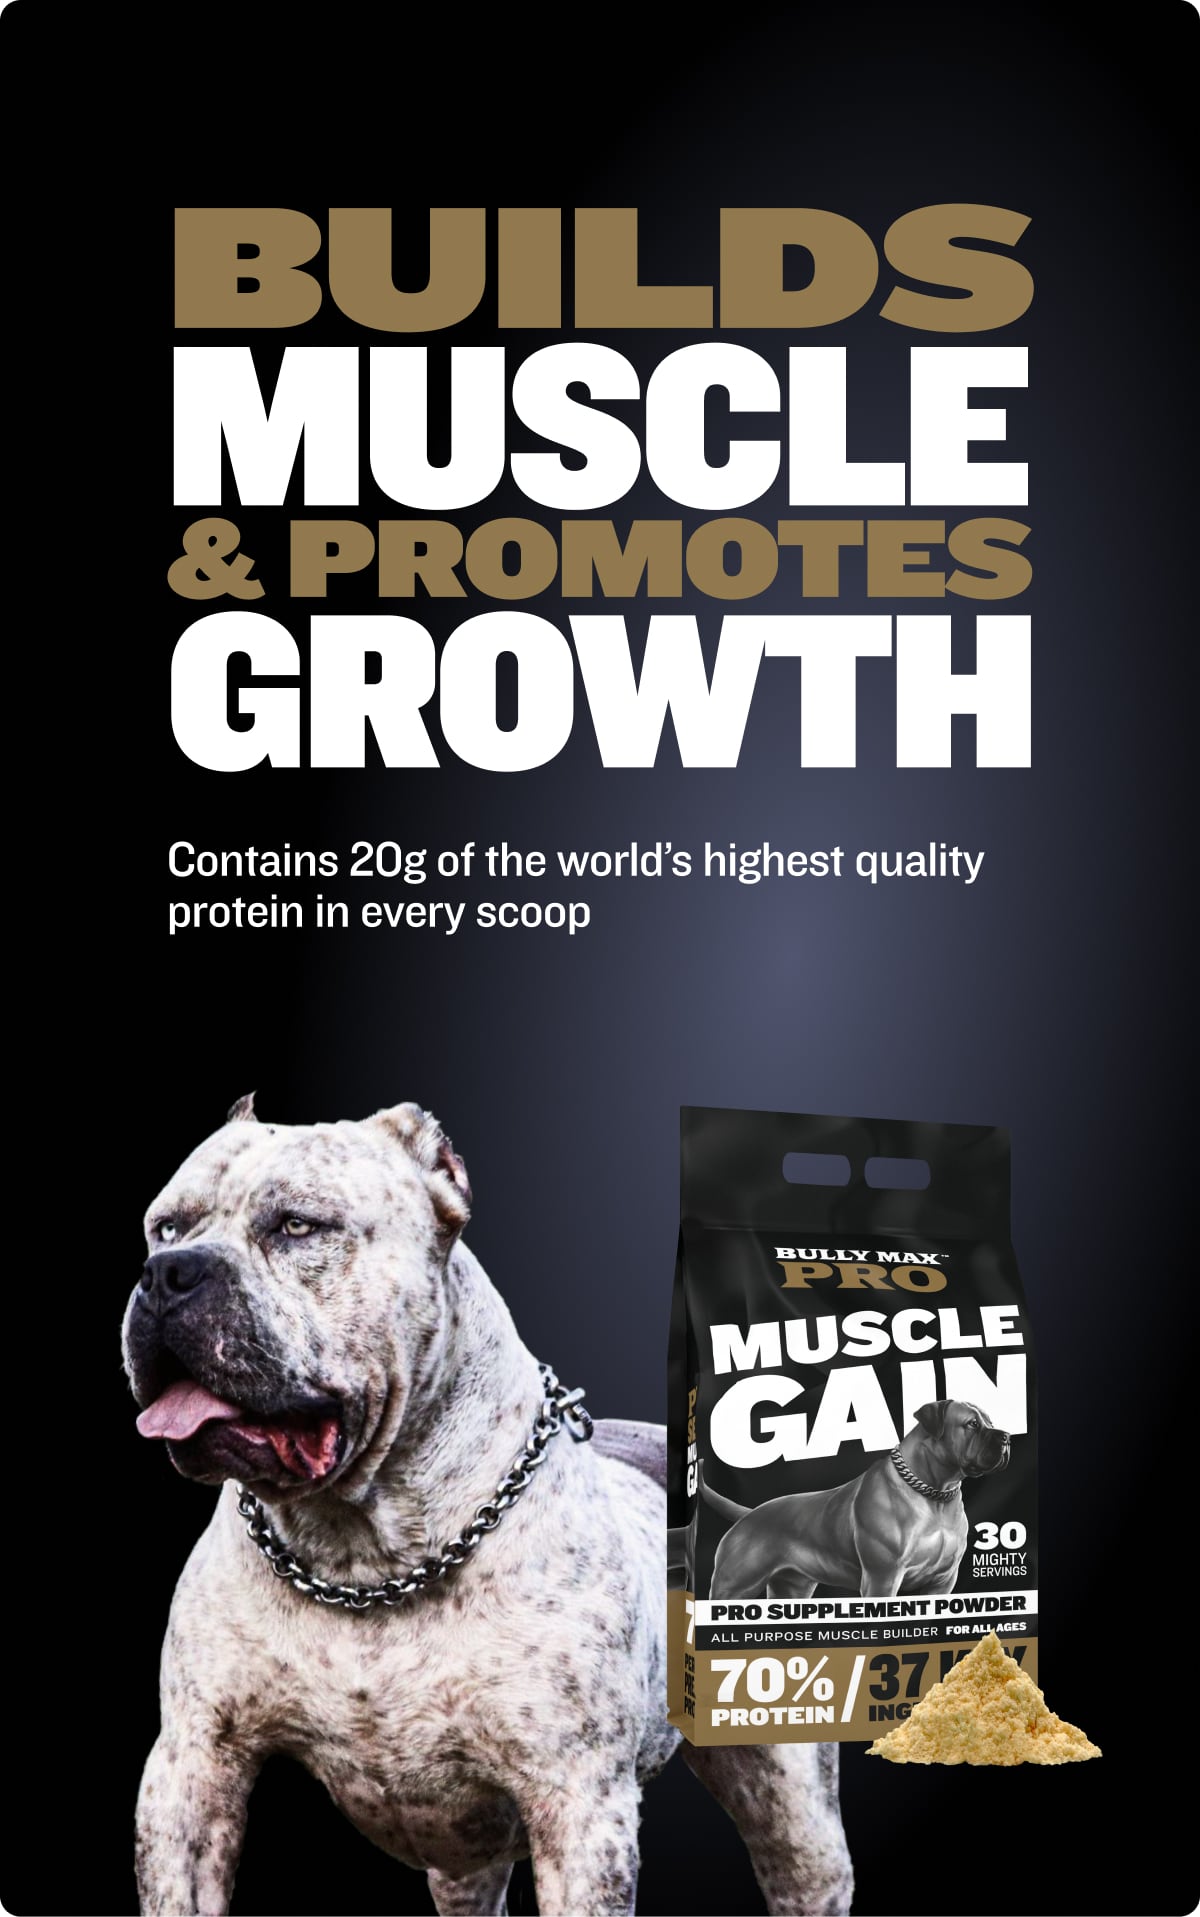 Bully Max Pro is the most powerful muscle builder. Builds muscle and promotes growth. Professional series supplement.